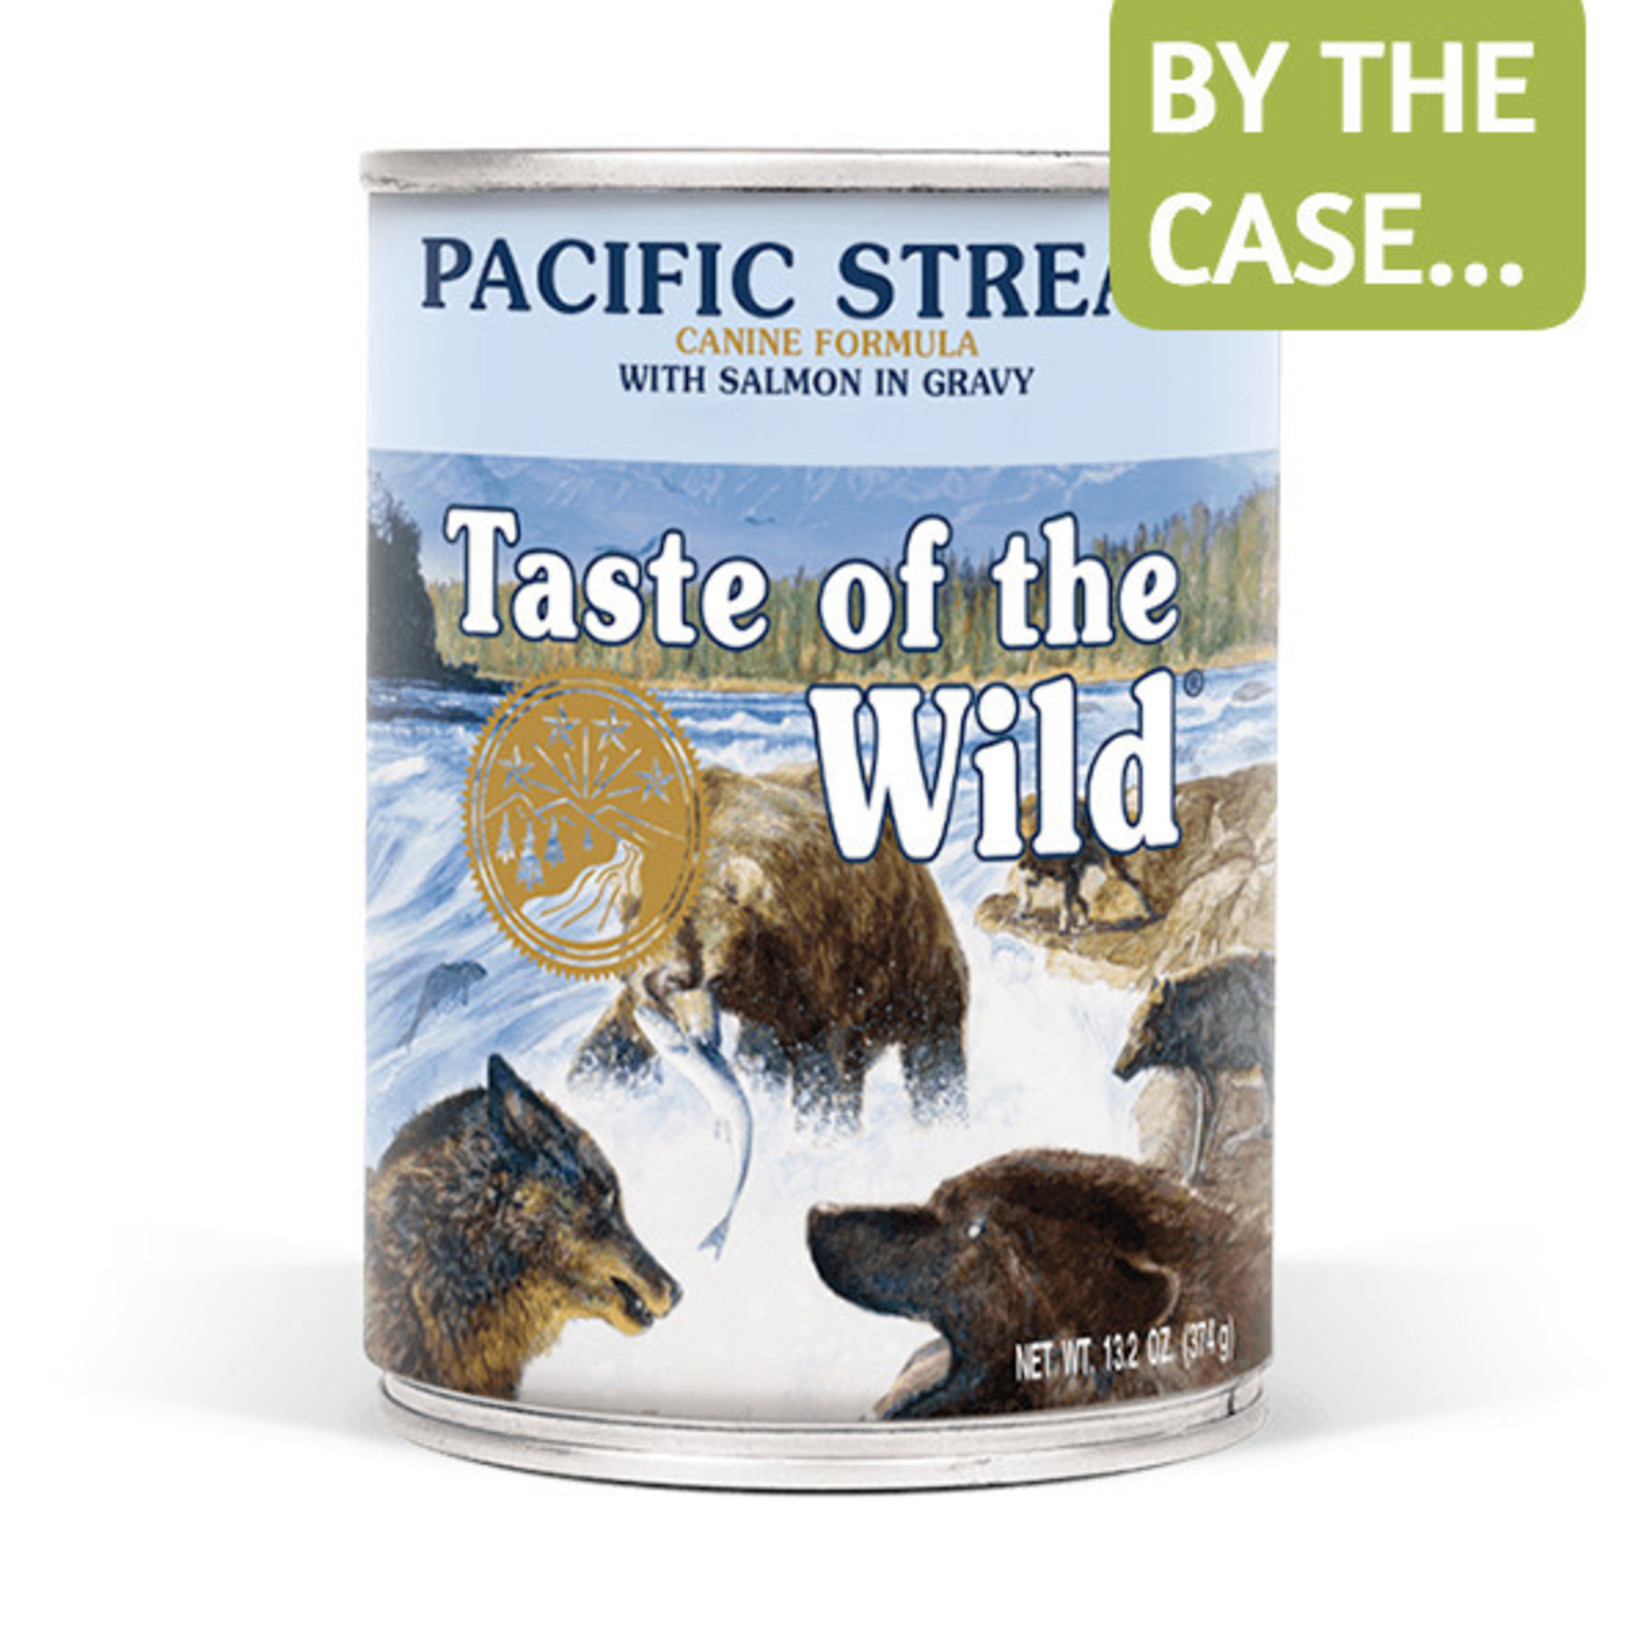 Taste of the Wild Taste of the Wild Wet Dog Food Pacific Stream Formula with Salmon in Gravy 13oz Can Grain Free